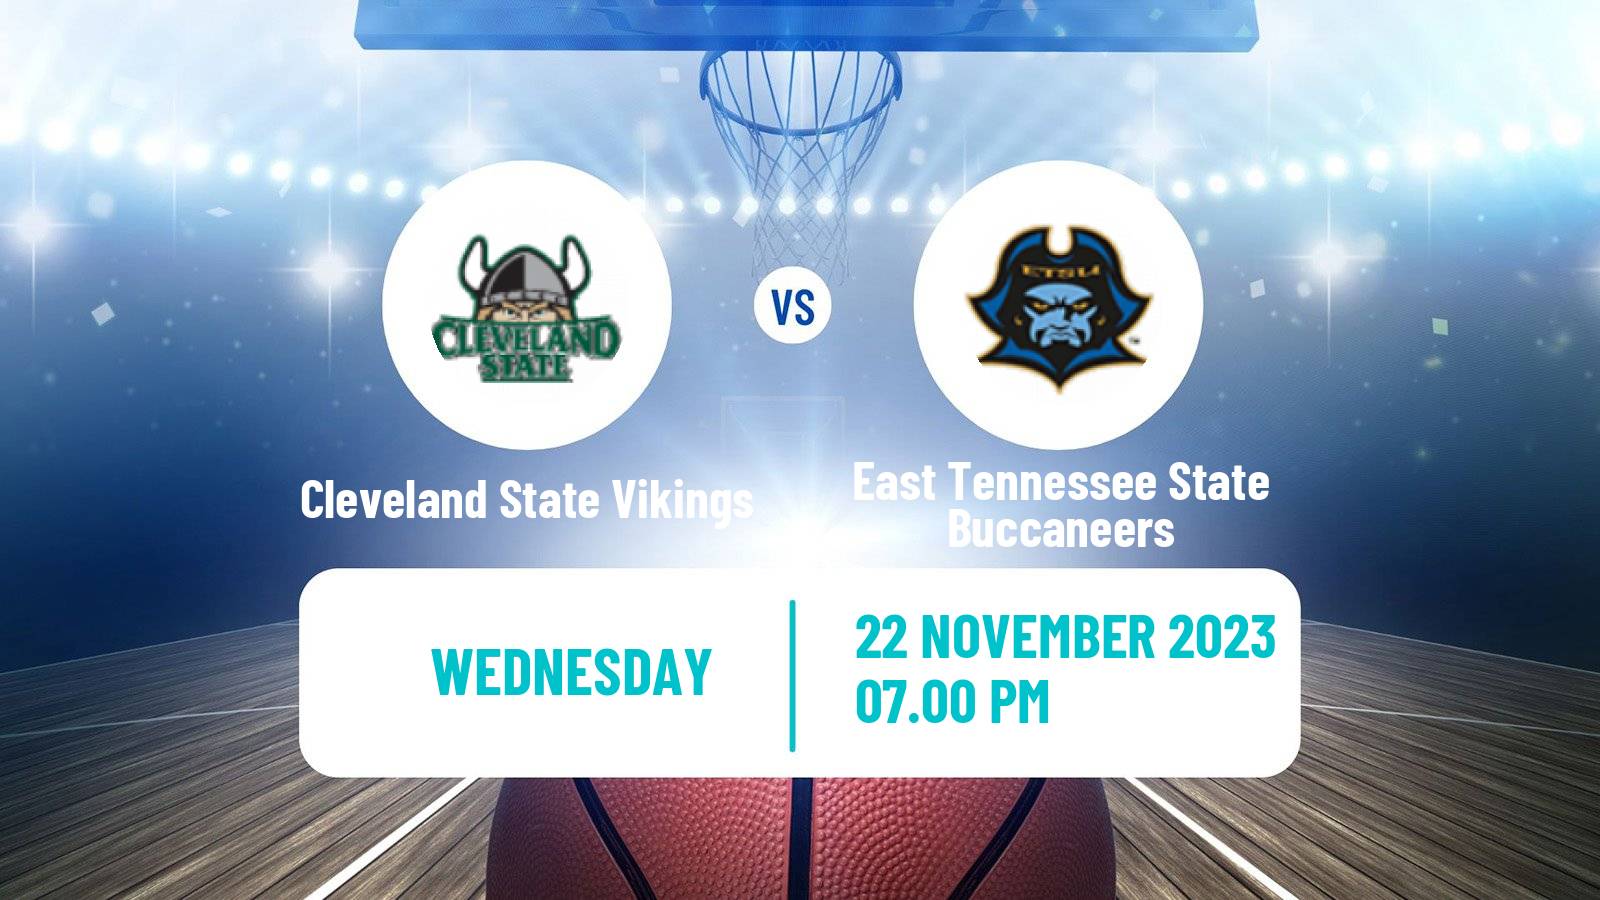 Basketball NCAA College Basketball Cleveland State Vikings - East Tennessee State Buccaneers